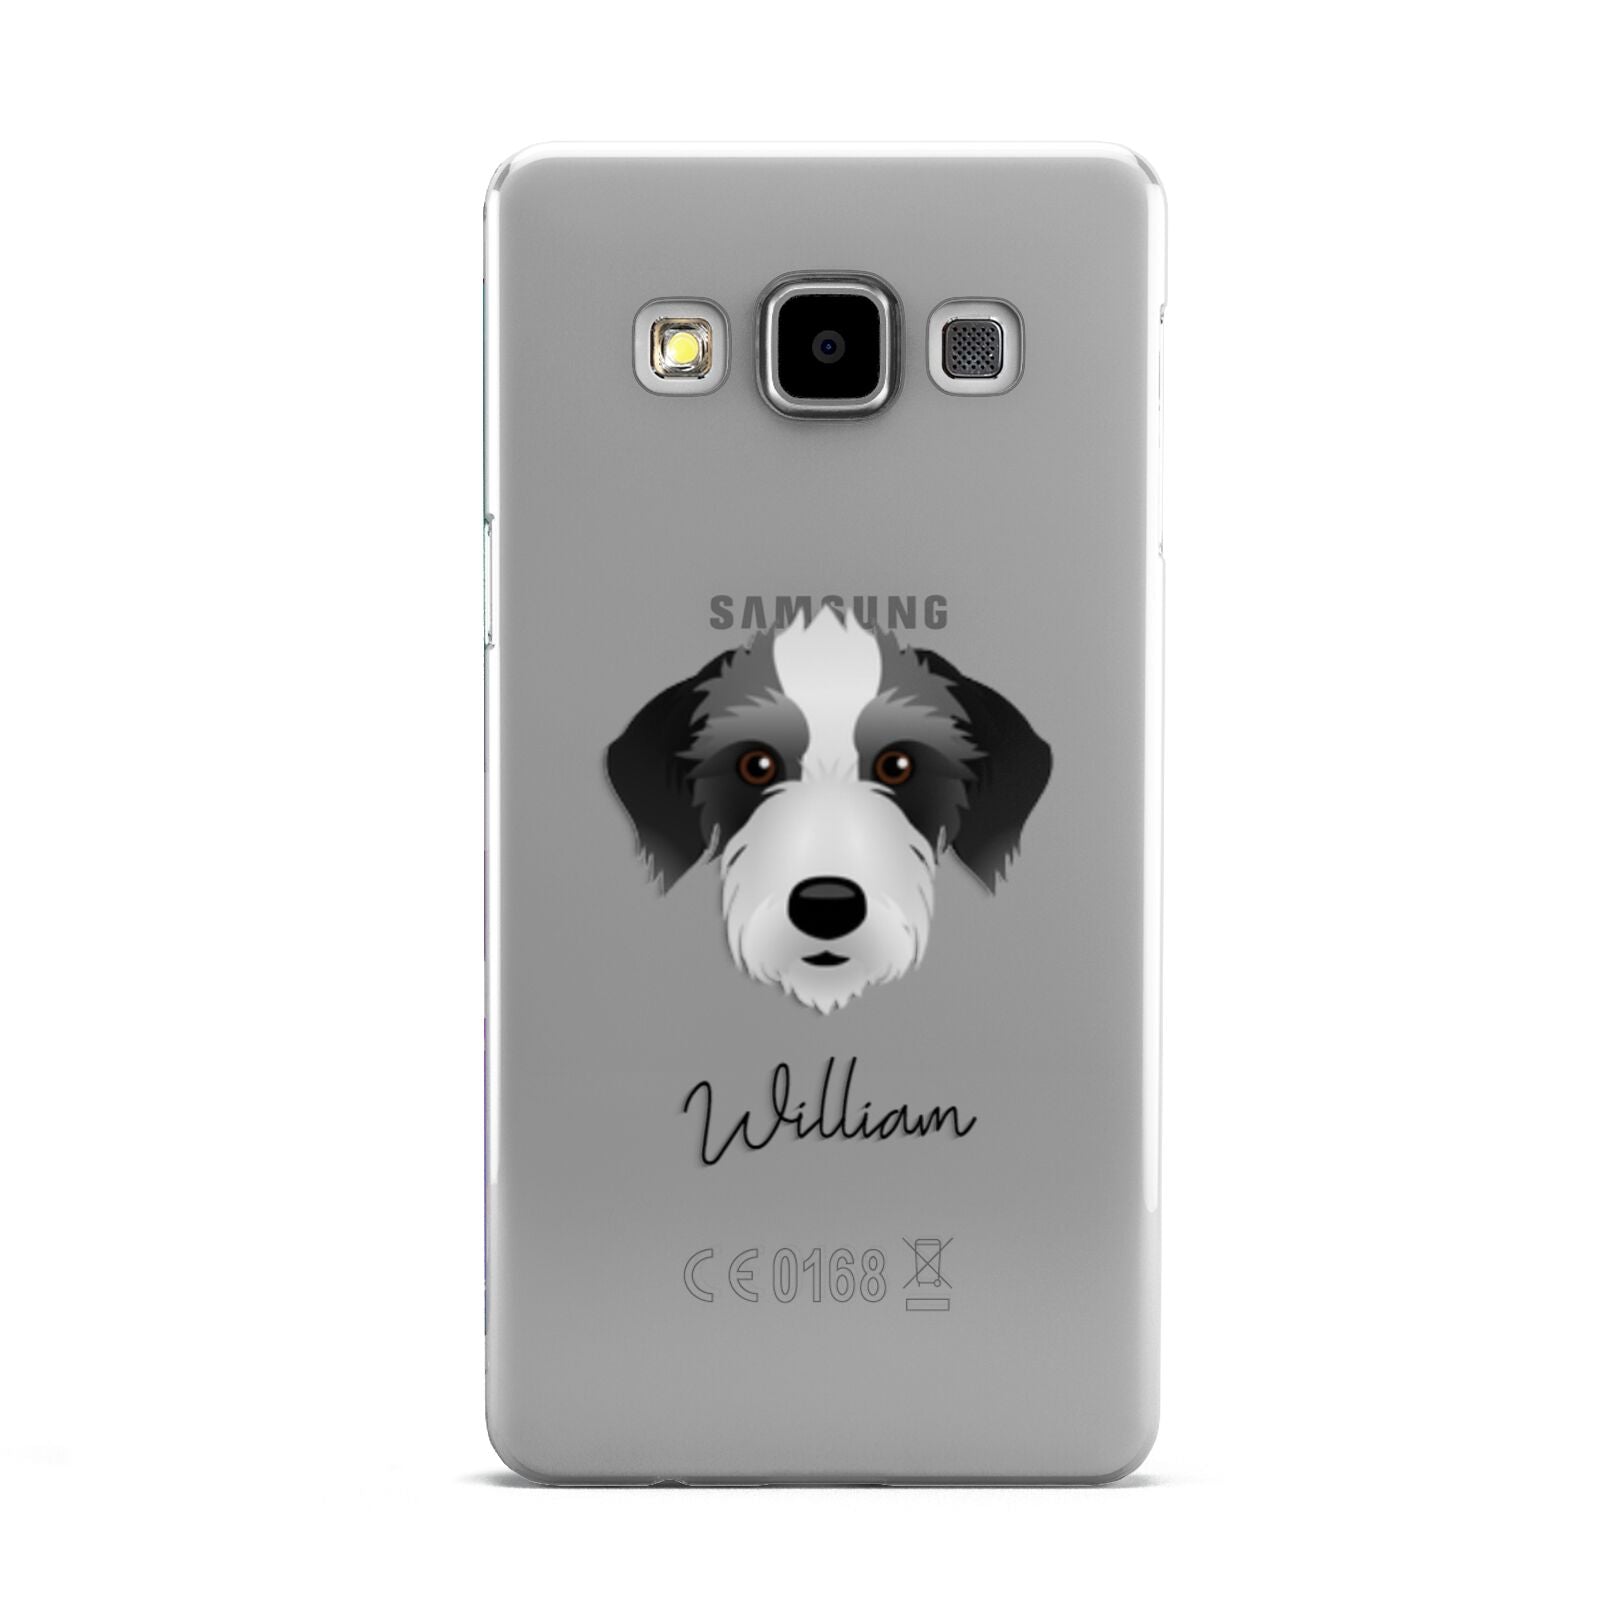 Bedlington Whippet Personalised Samsung Galaxy A5 Case